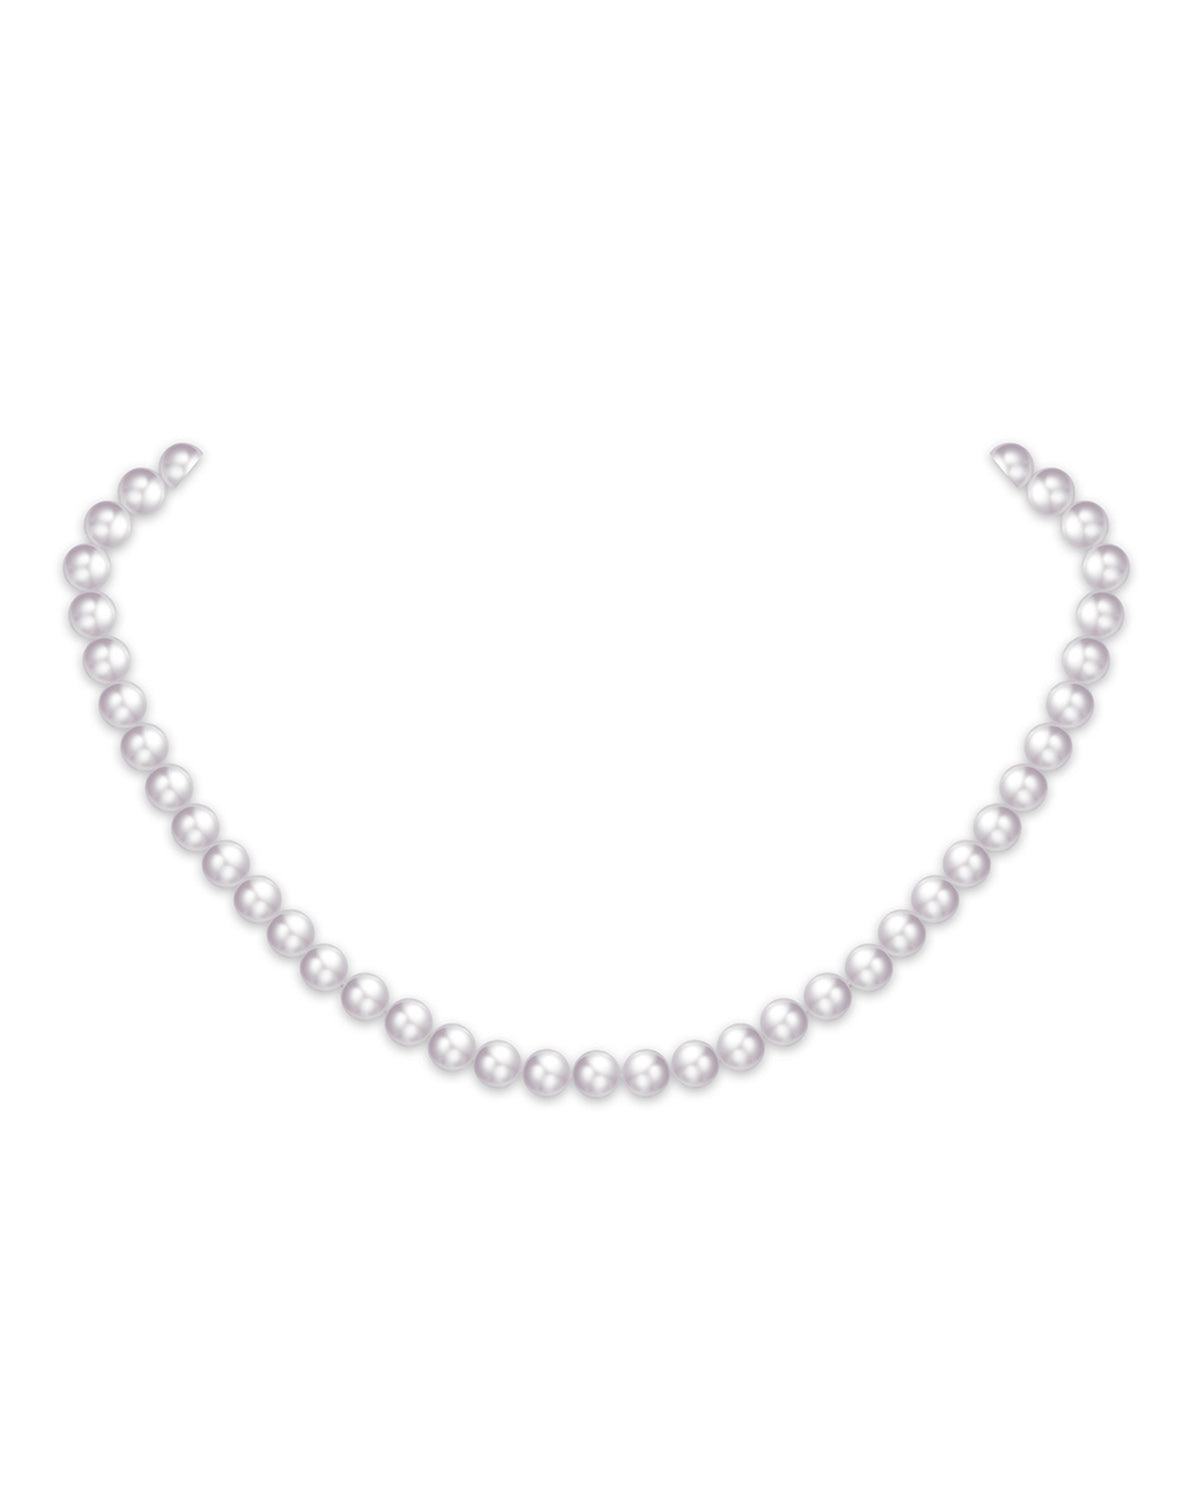 6.5-7mm Freshwater Pearl Necklace - AAA Quality